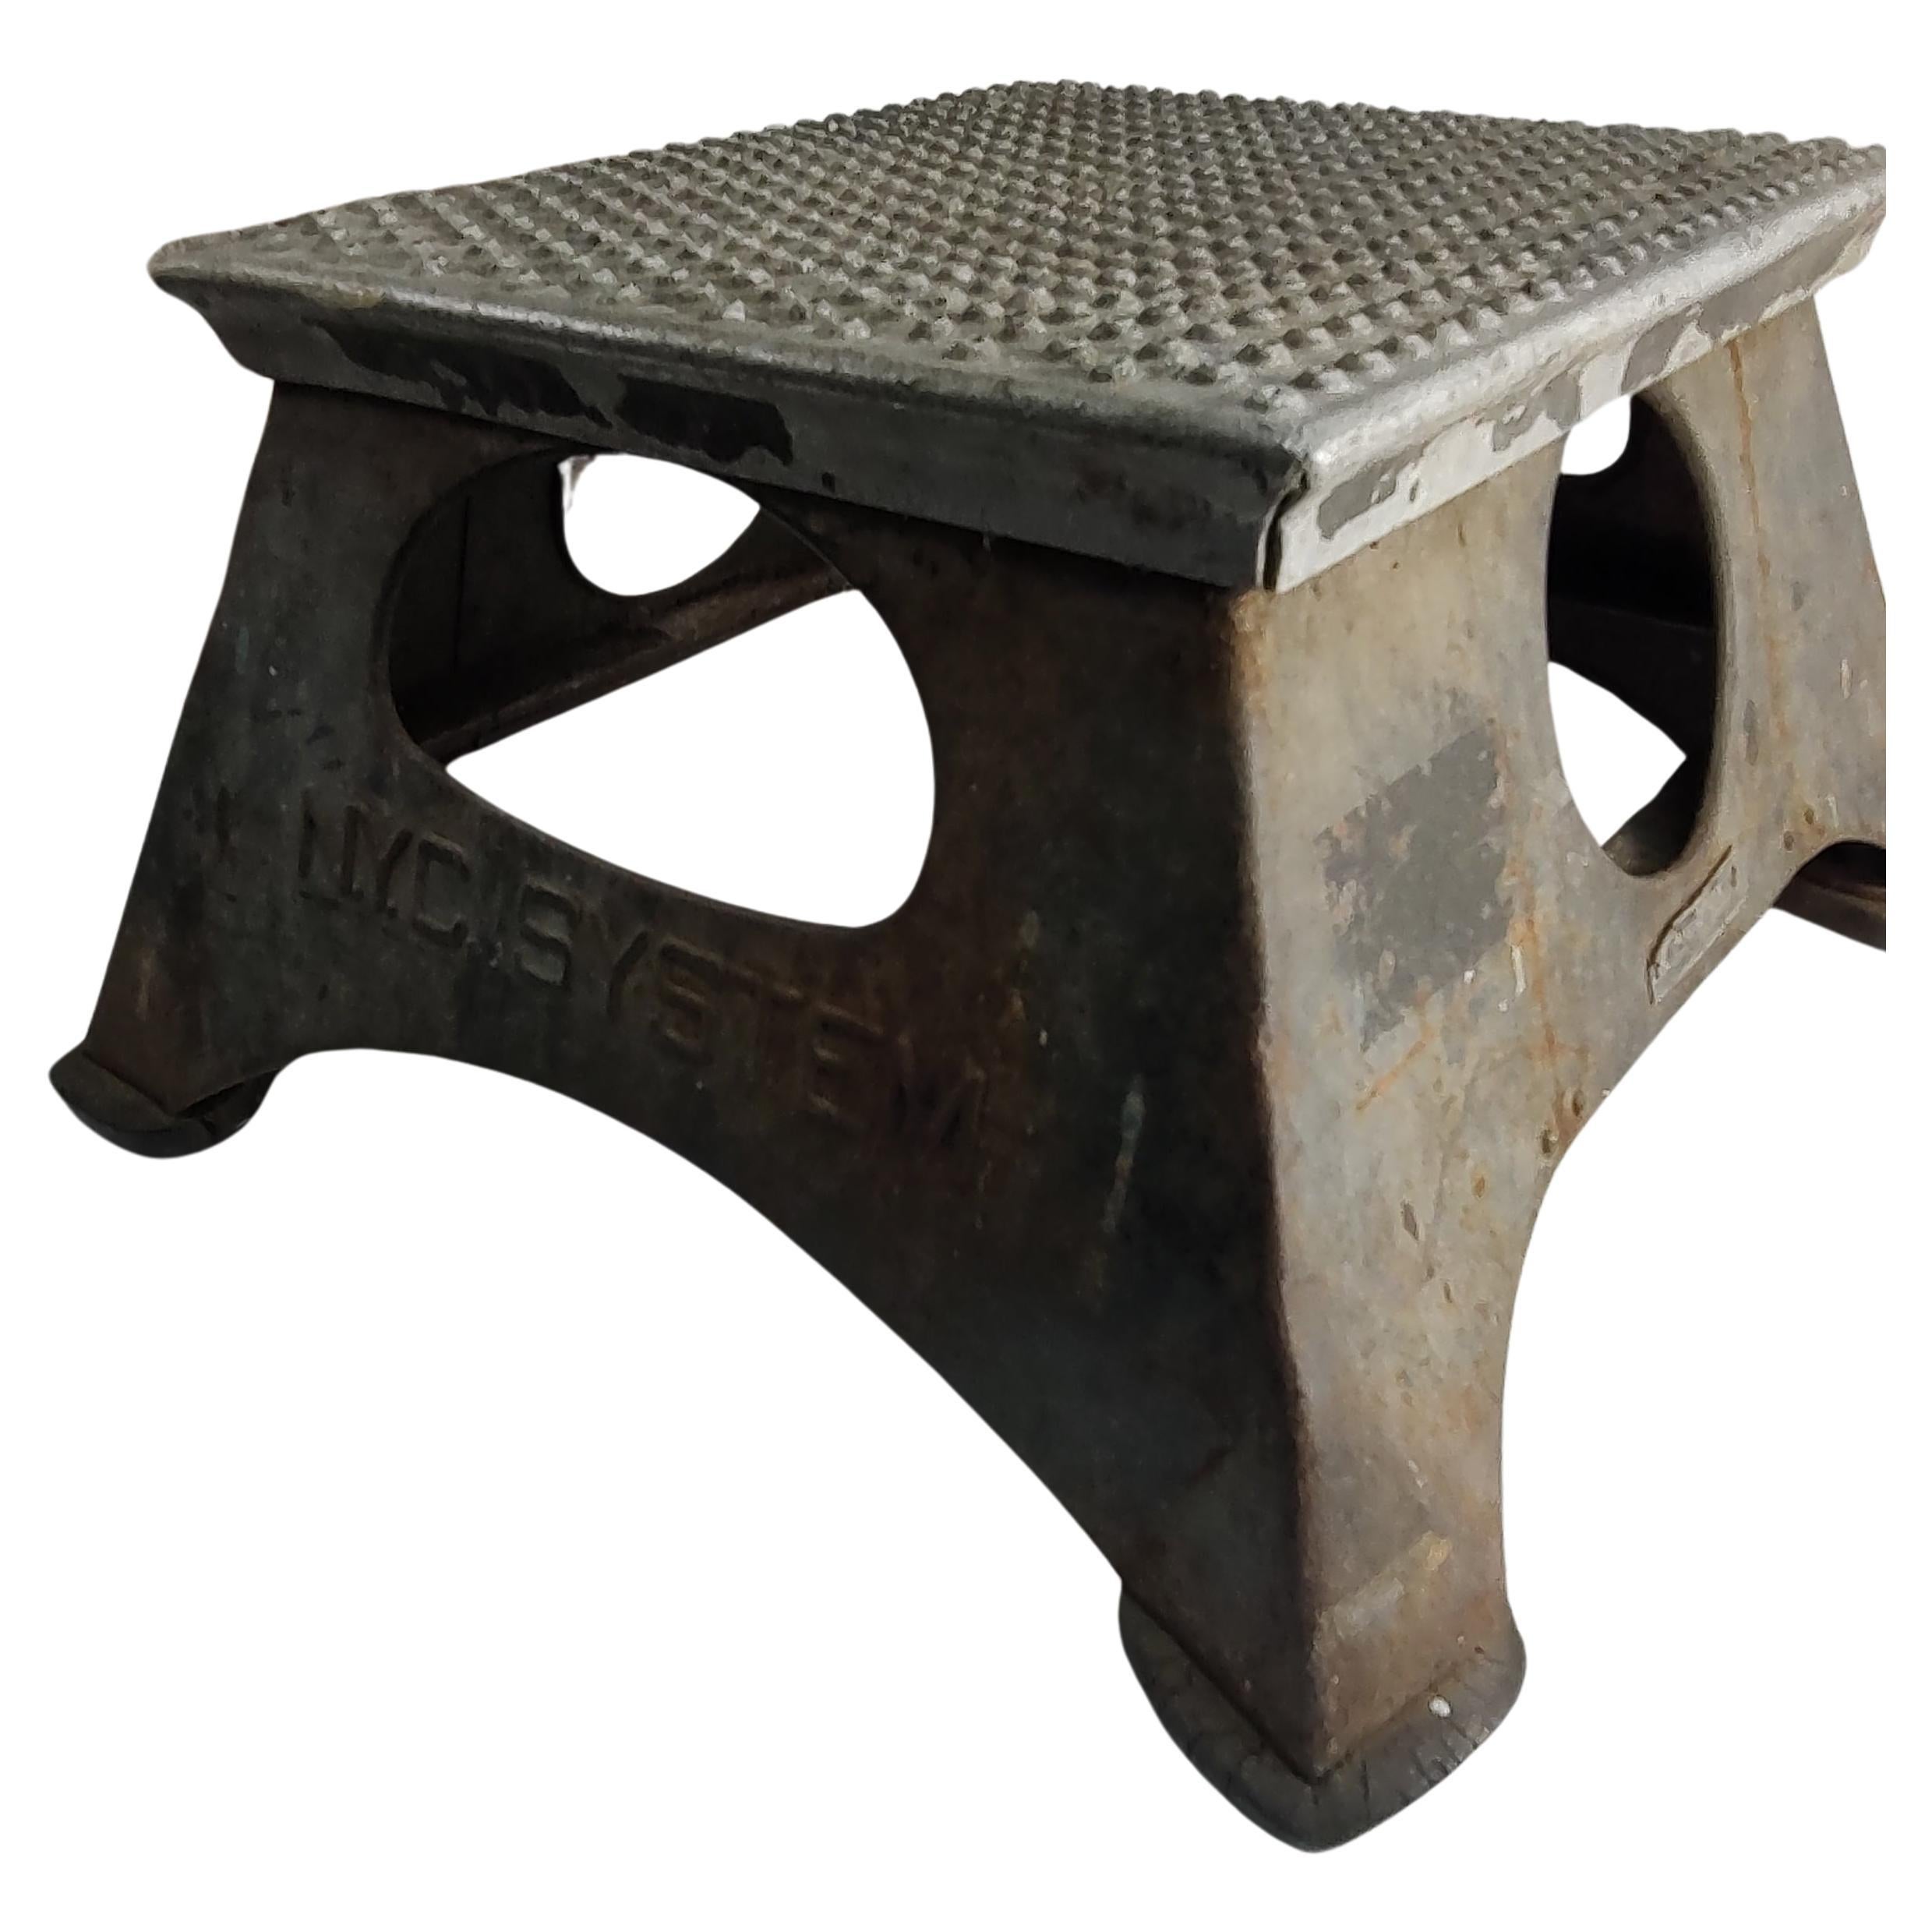 Art Deco Step Stool for New York Central Railroad System C1938